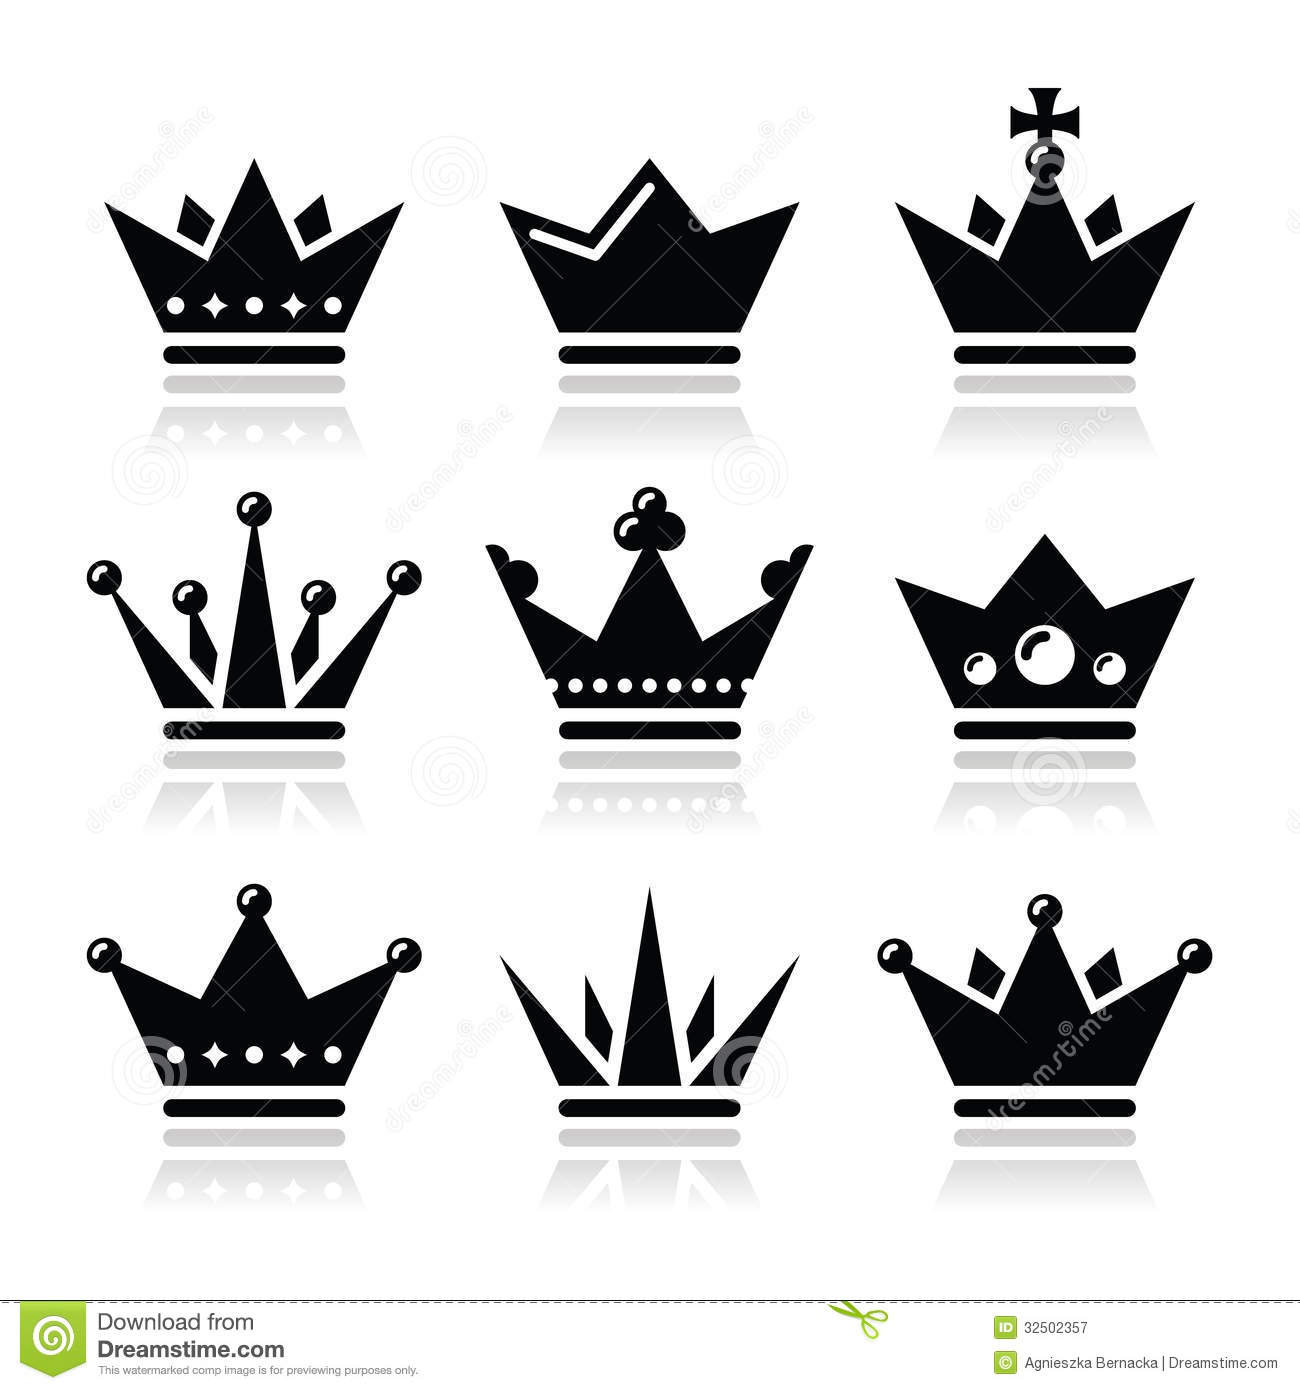 6 King And Queen Icon Images